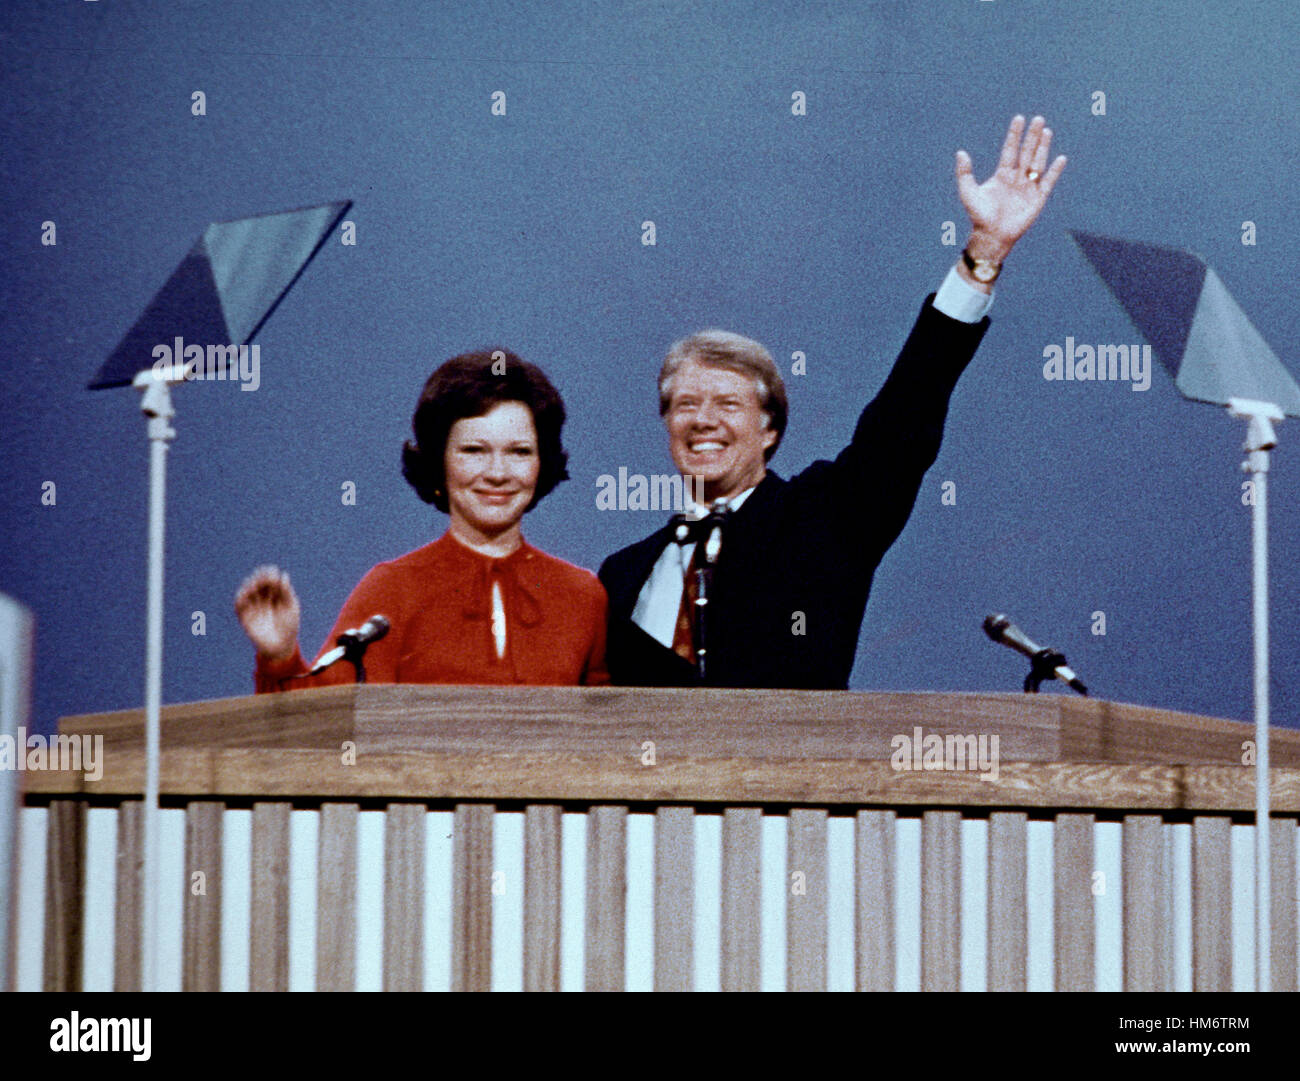 Governor Jimmy Carter (Democrat of Georgia), the 1976 Democratic Party nominee for President of the United States, right, and his wife Rosalynn Carter, left, acknowledge the cheers of the delegates following their acceptance speeches at the 1976 Democrati Stock Photo